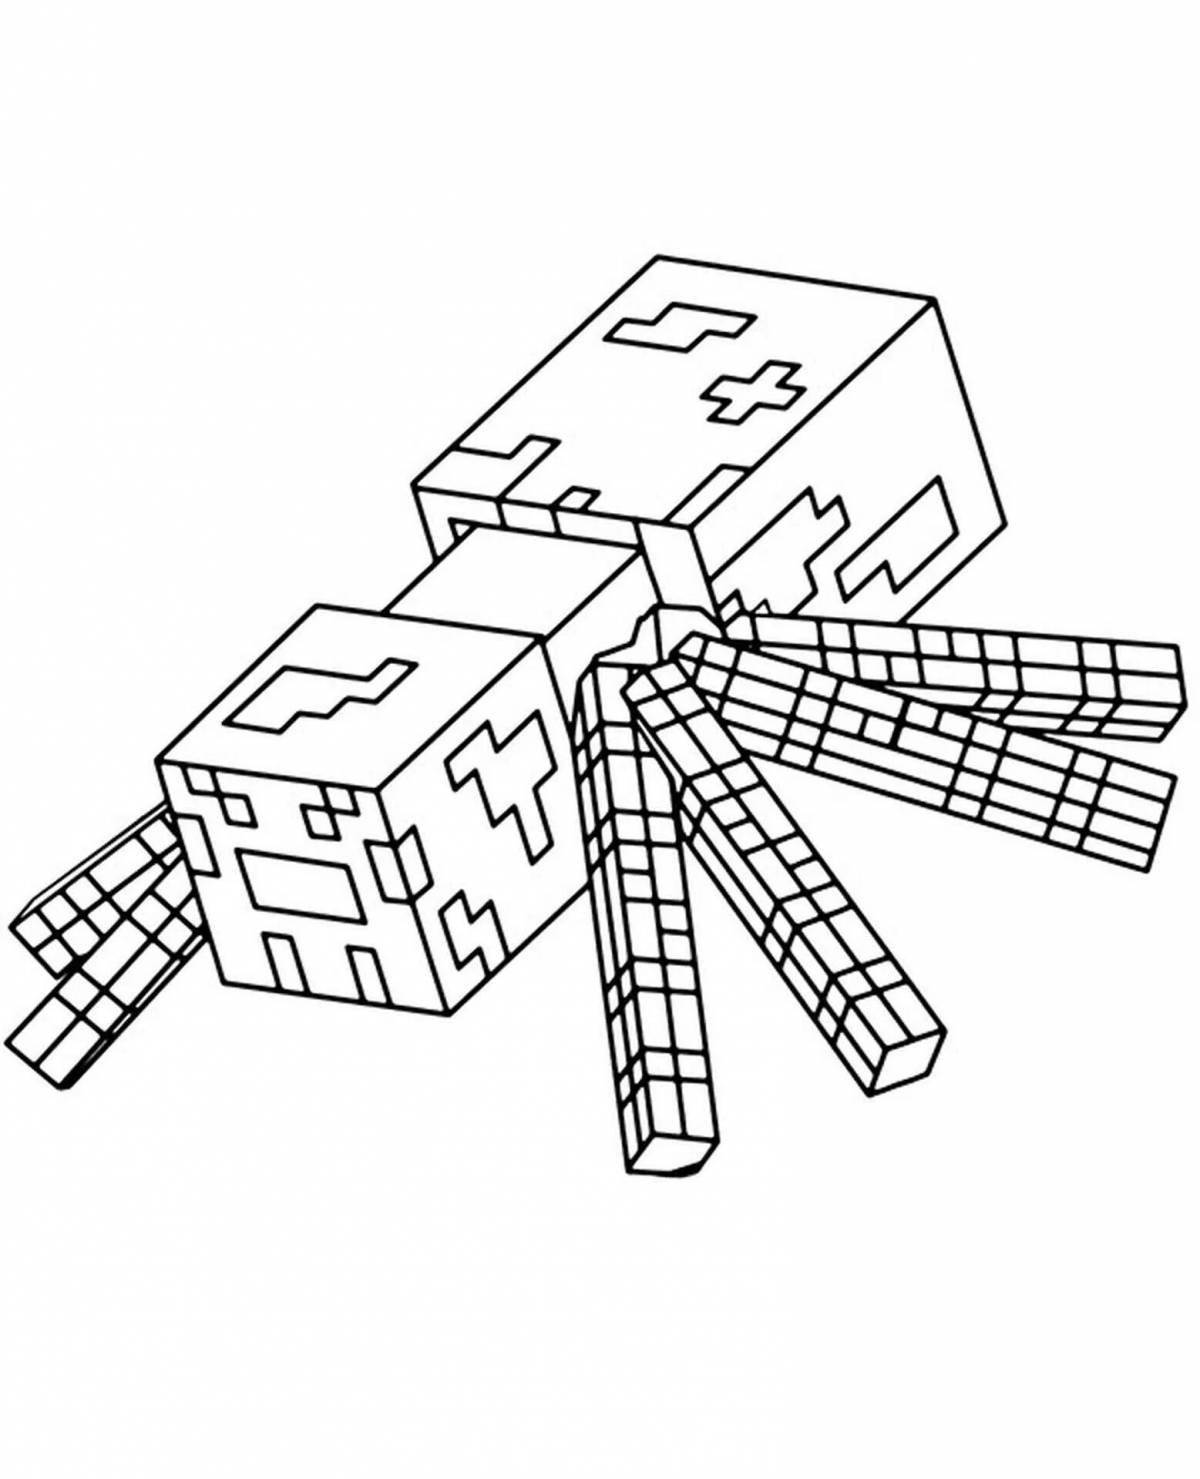 Creative minecraft things coloring page